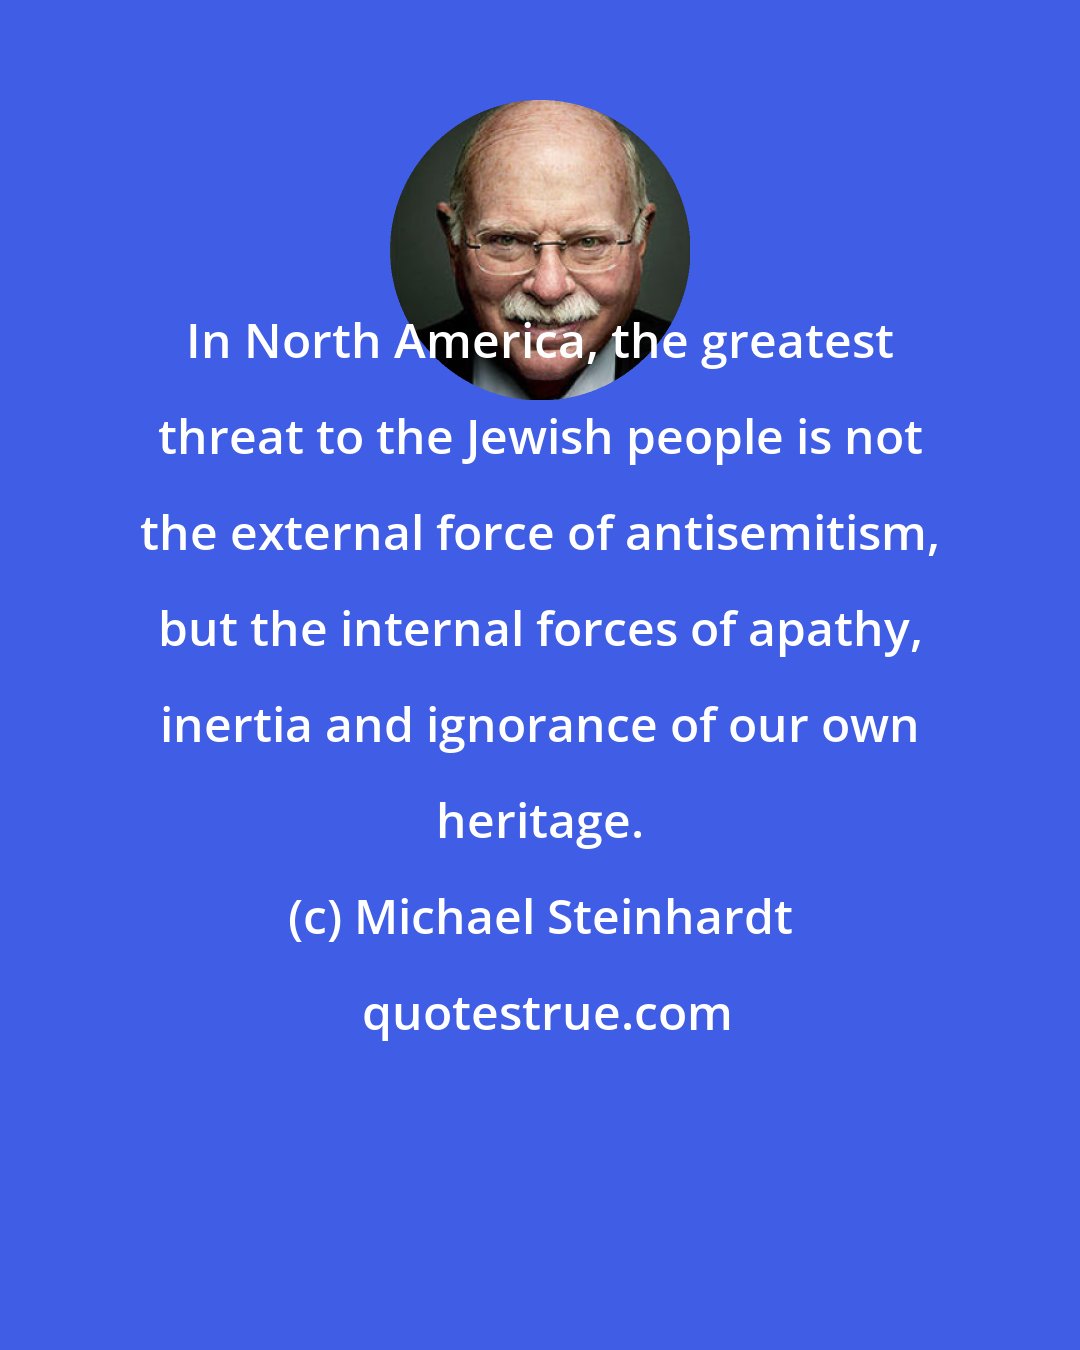 Michael Steinhardt: In North America, the greatest threat to the Jewish people is not the external force of antisemitism, but the internal forces of apathy, inertia and ignorance of our own heritage.